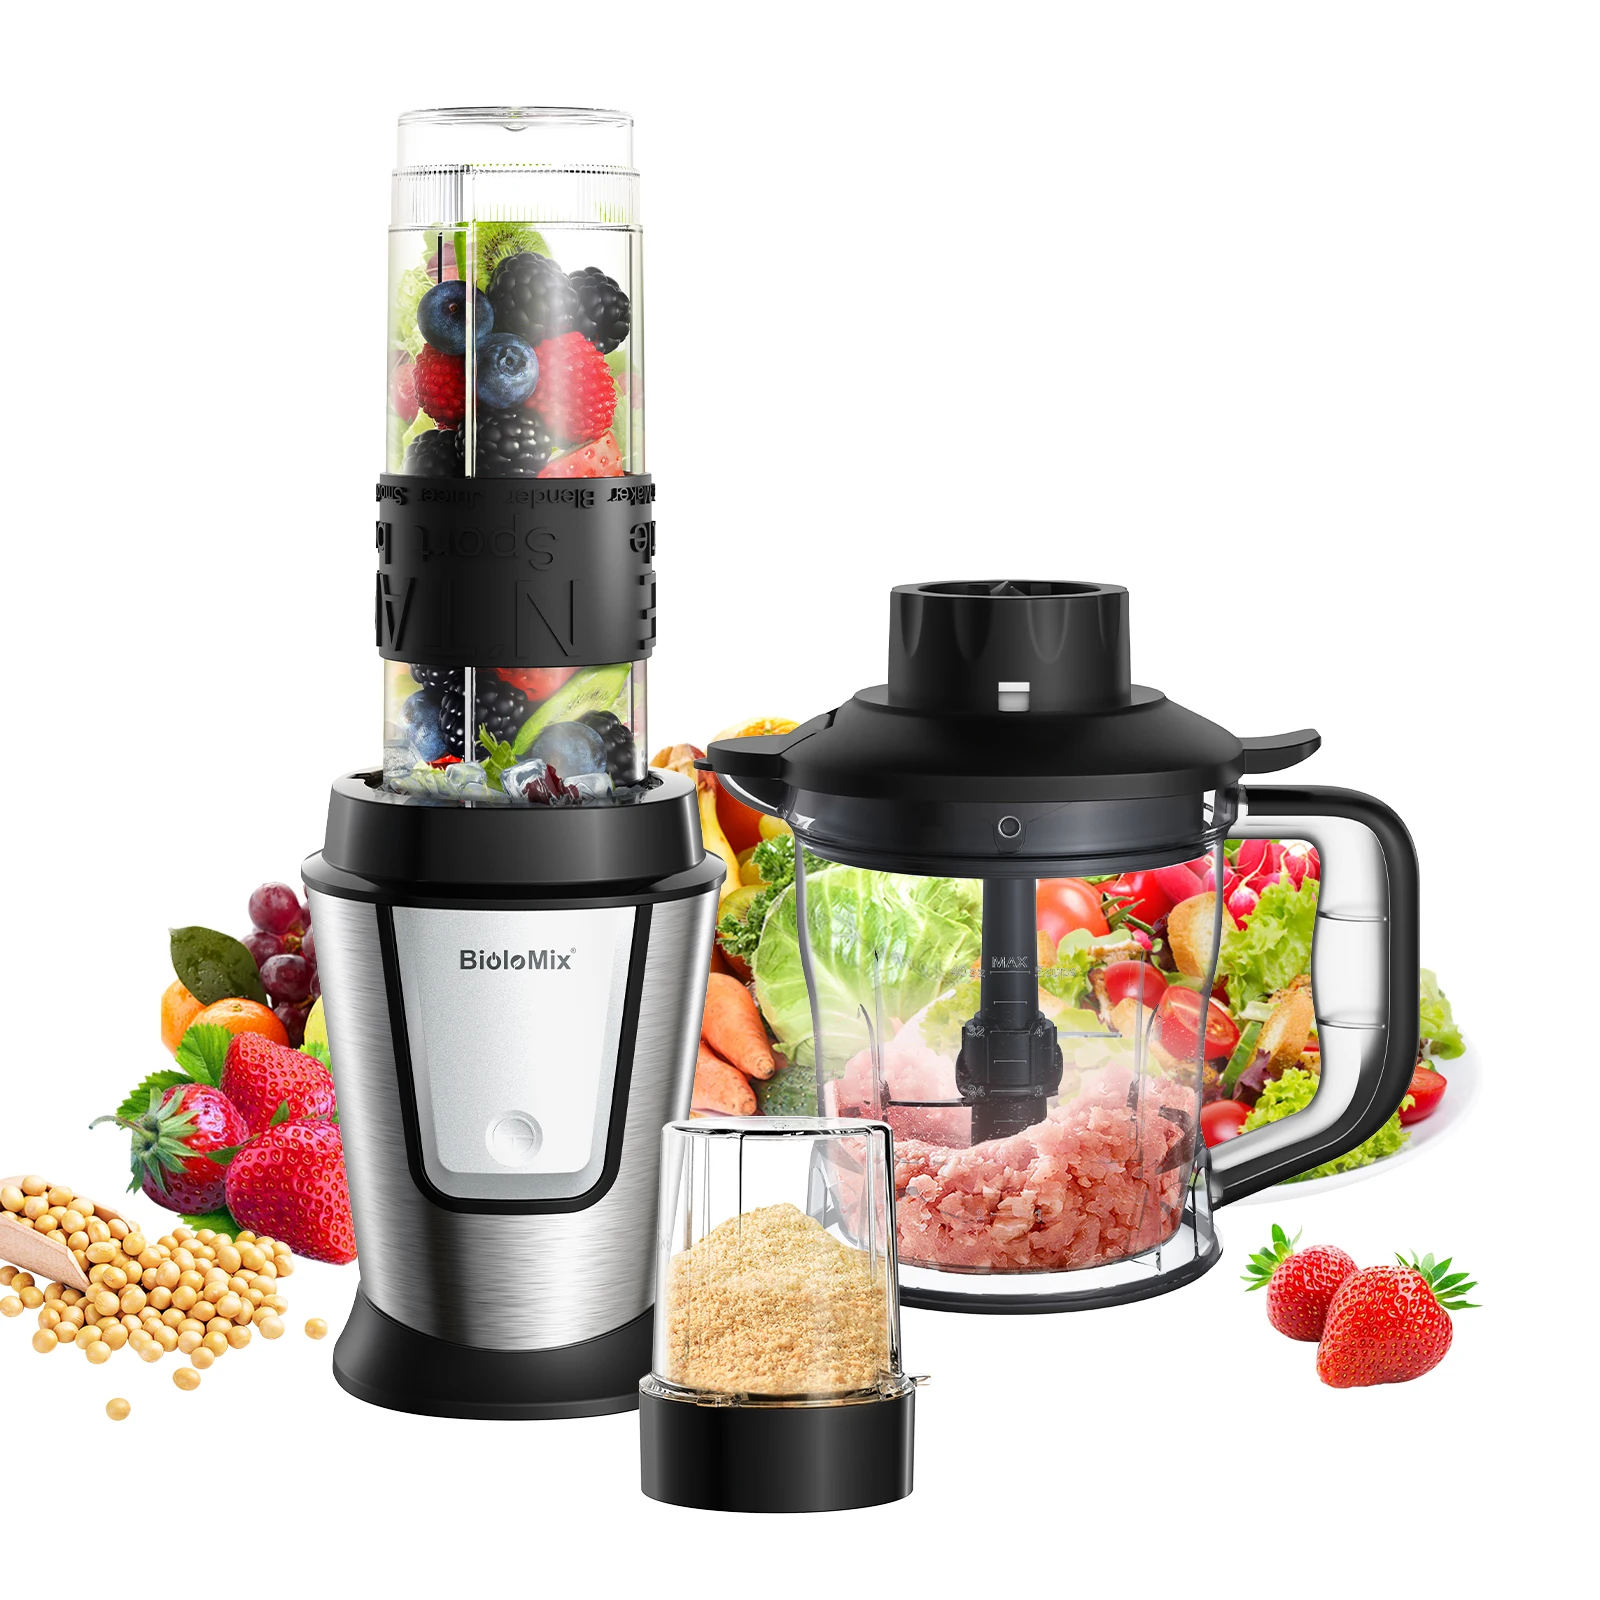 

BioloMix 3-in-1 Multifunctional Food Processor 700W Portable Juicer Blender Personal Smoothie Mixer Food Chopper and Dry Grinder